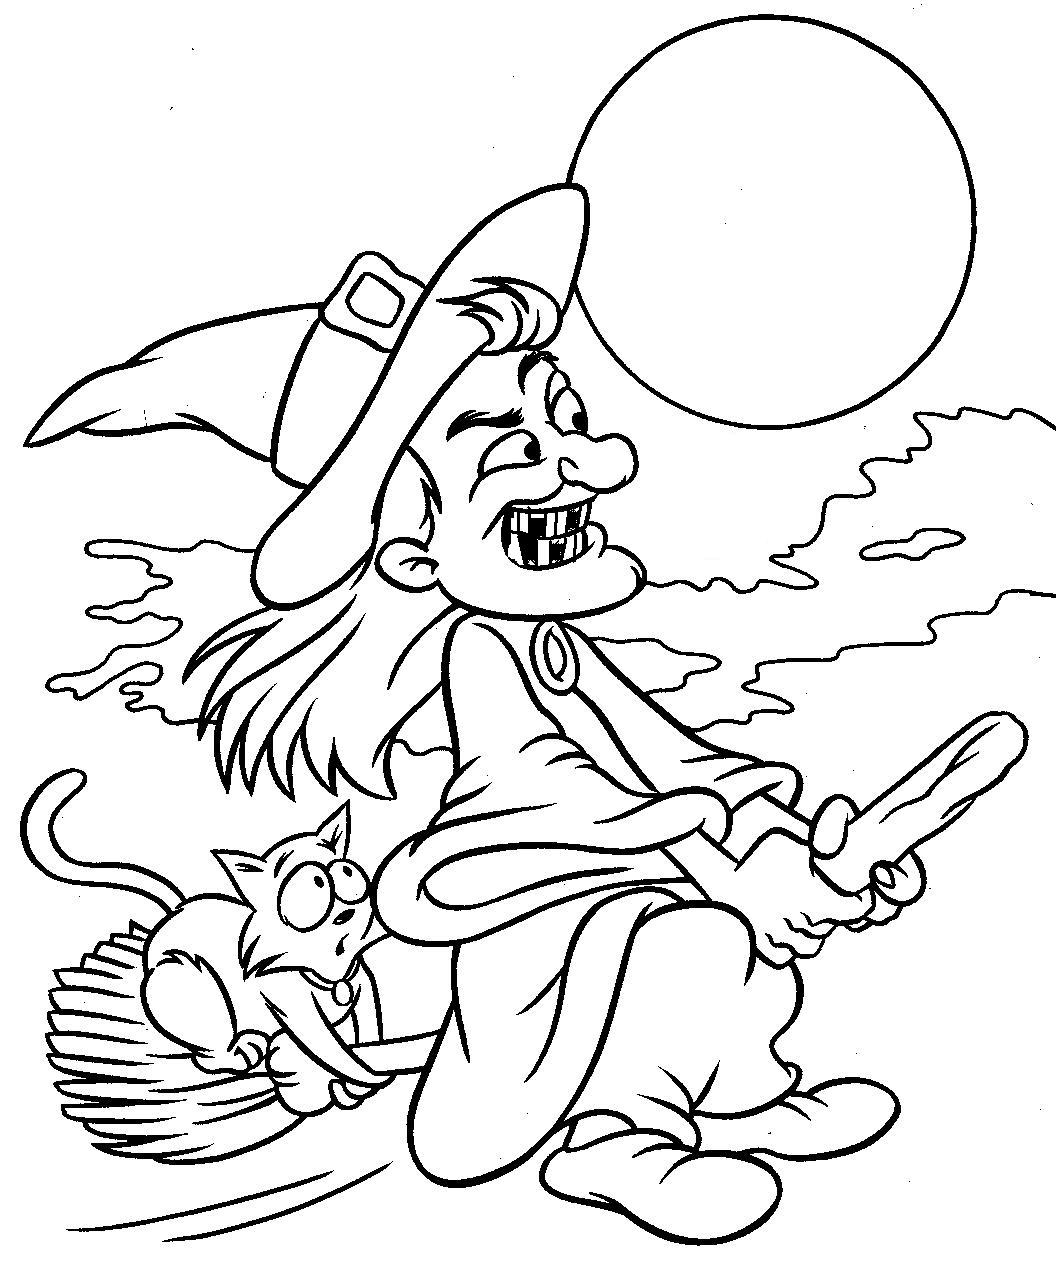 Coloring Effy Moom Free Coloring Picture wallpaper give a chance to color on the wall without getting in trouble! Fill the walls of your home or office with stress-relieving [effymoom.blogspot.com]